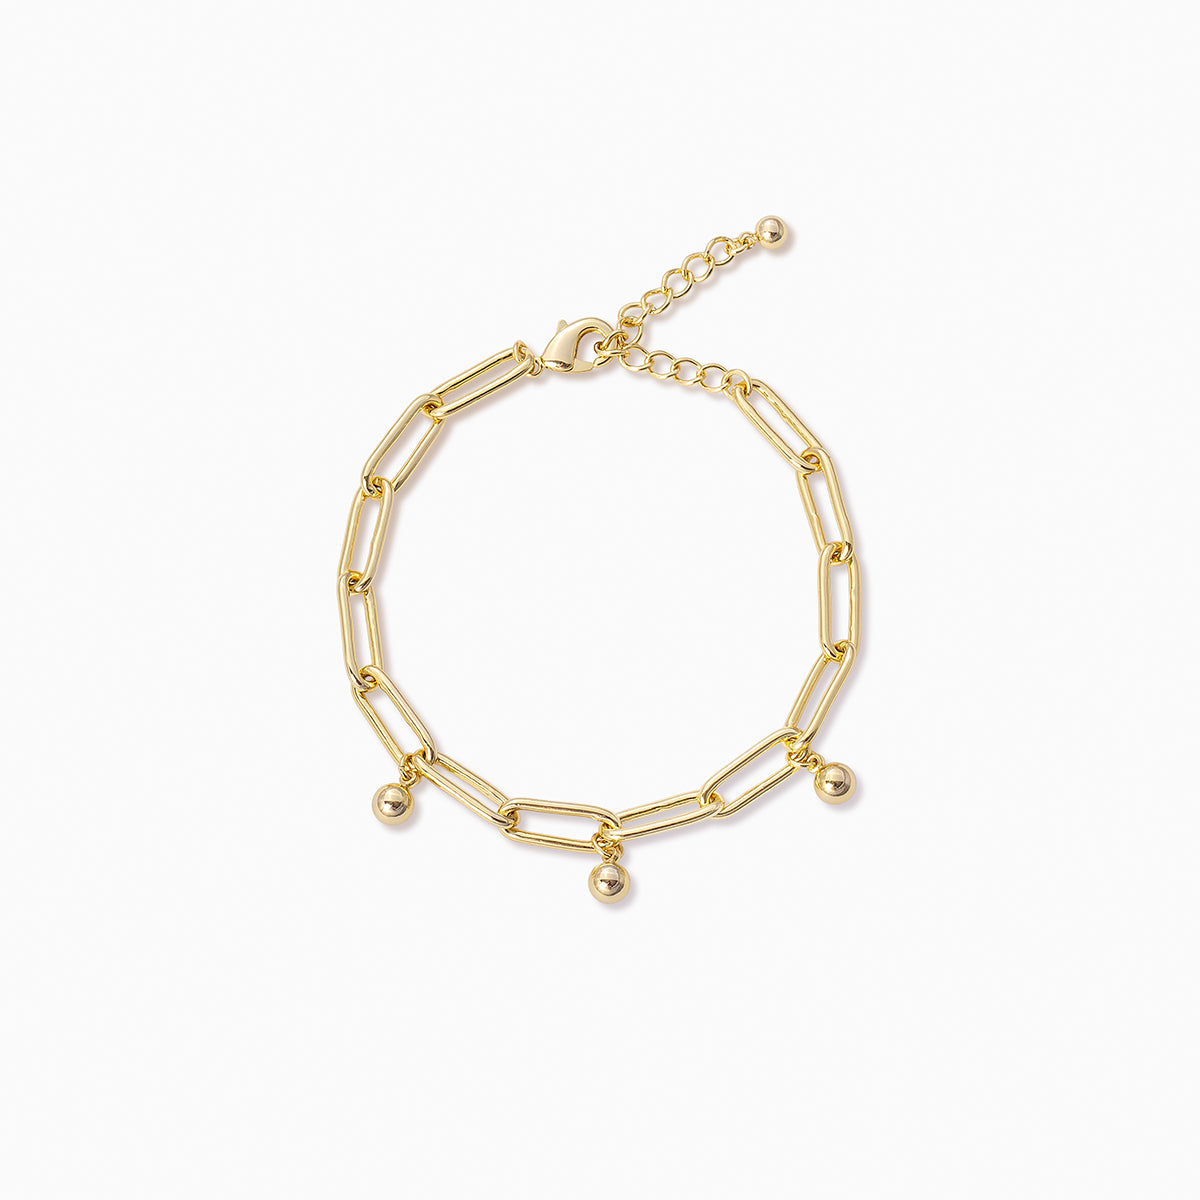 Step Up Chain Bracelet | Gold | Product Image | Uncommon James